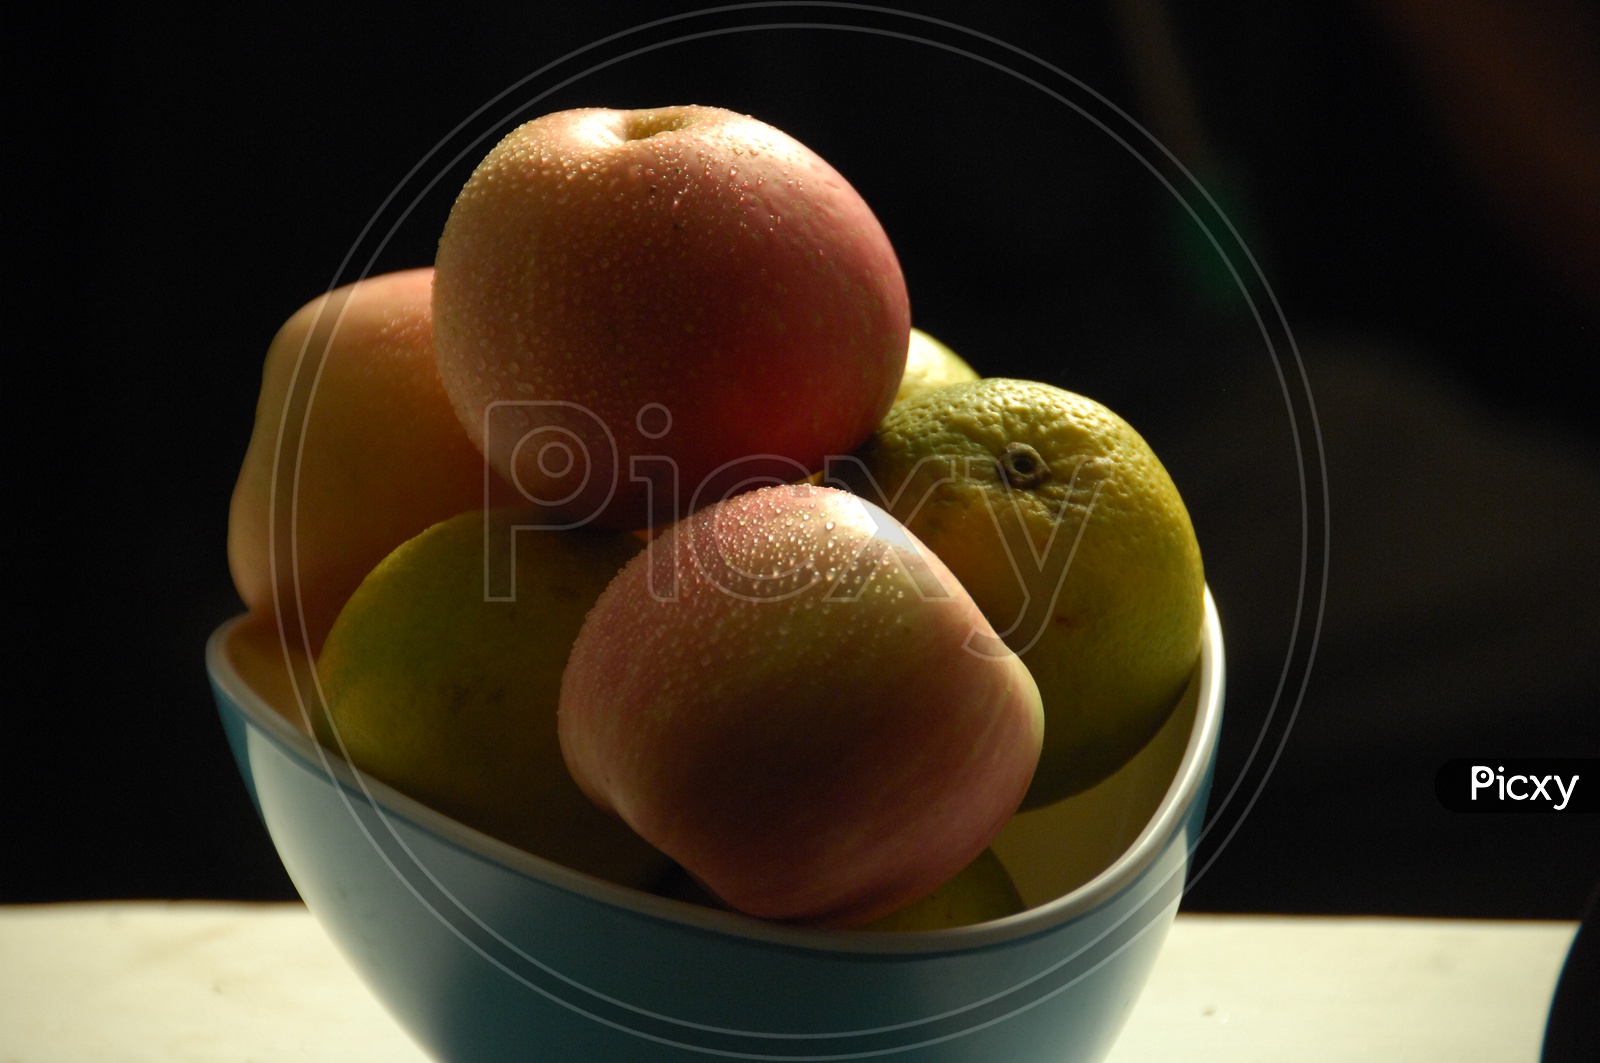 Apples and Mosambi Fruit or Citrus Fruit in a Bowl